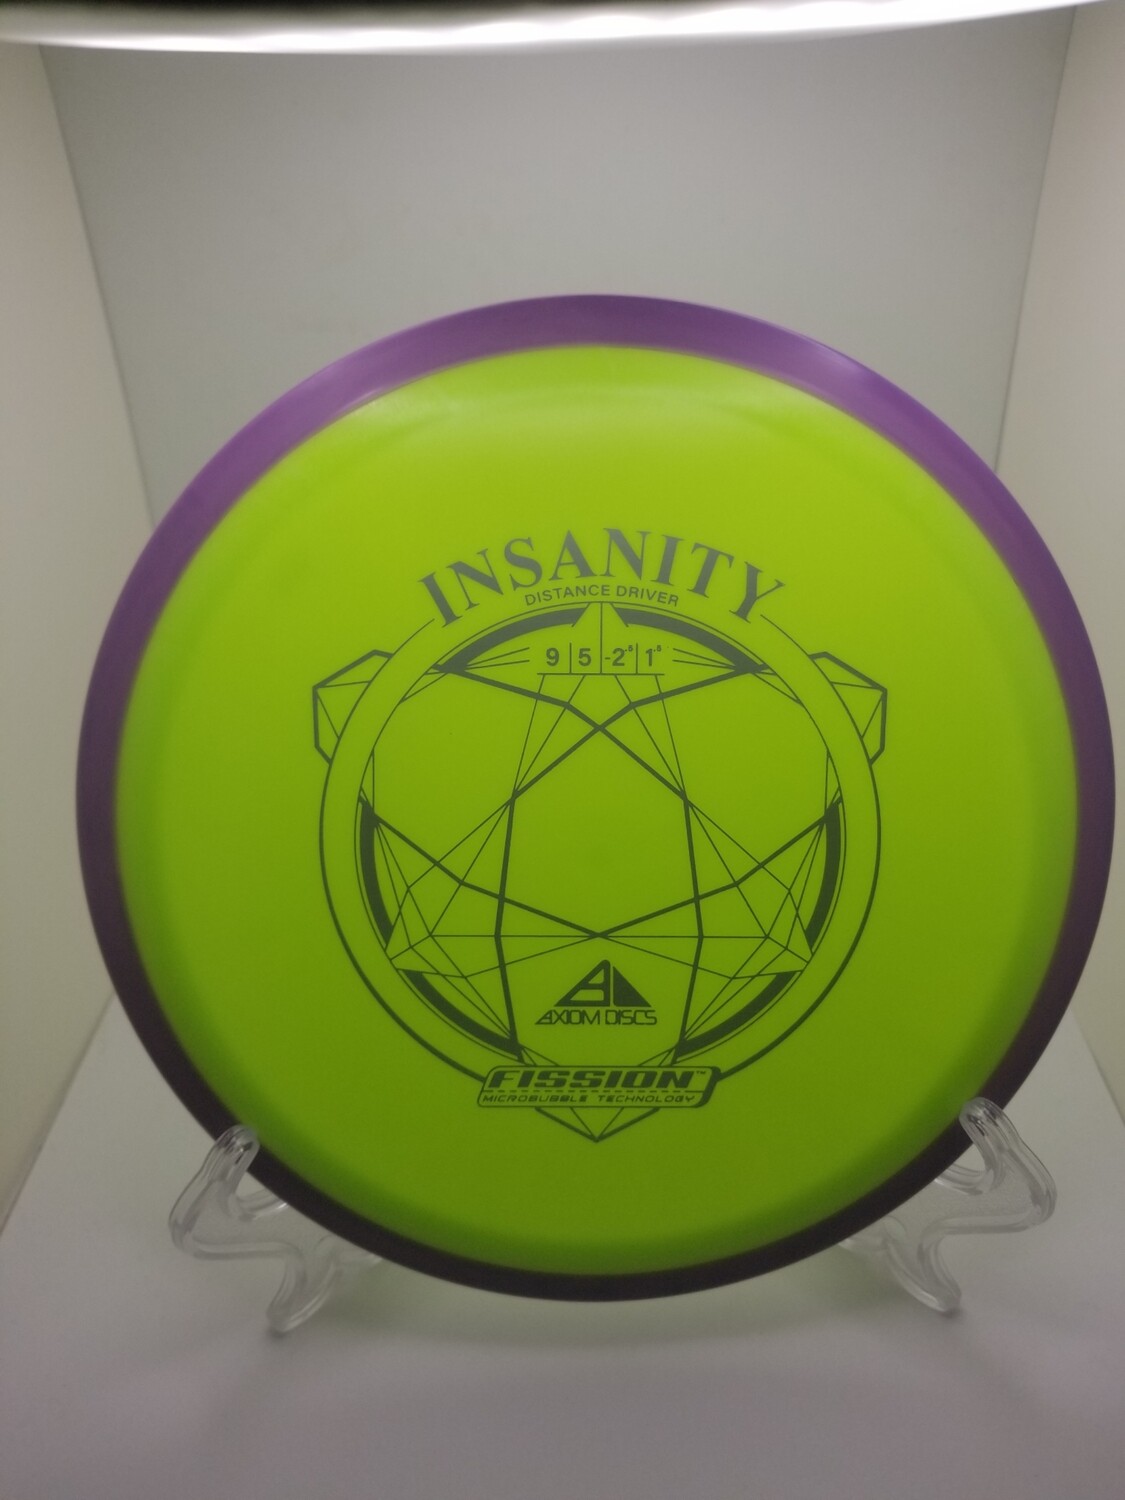 Axiom Discs Insanity Neon Yellow with Purple Rim Stamped Fission 159g